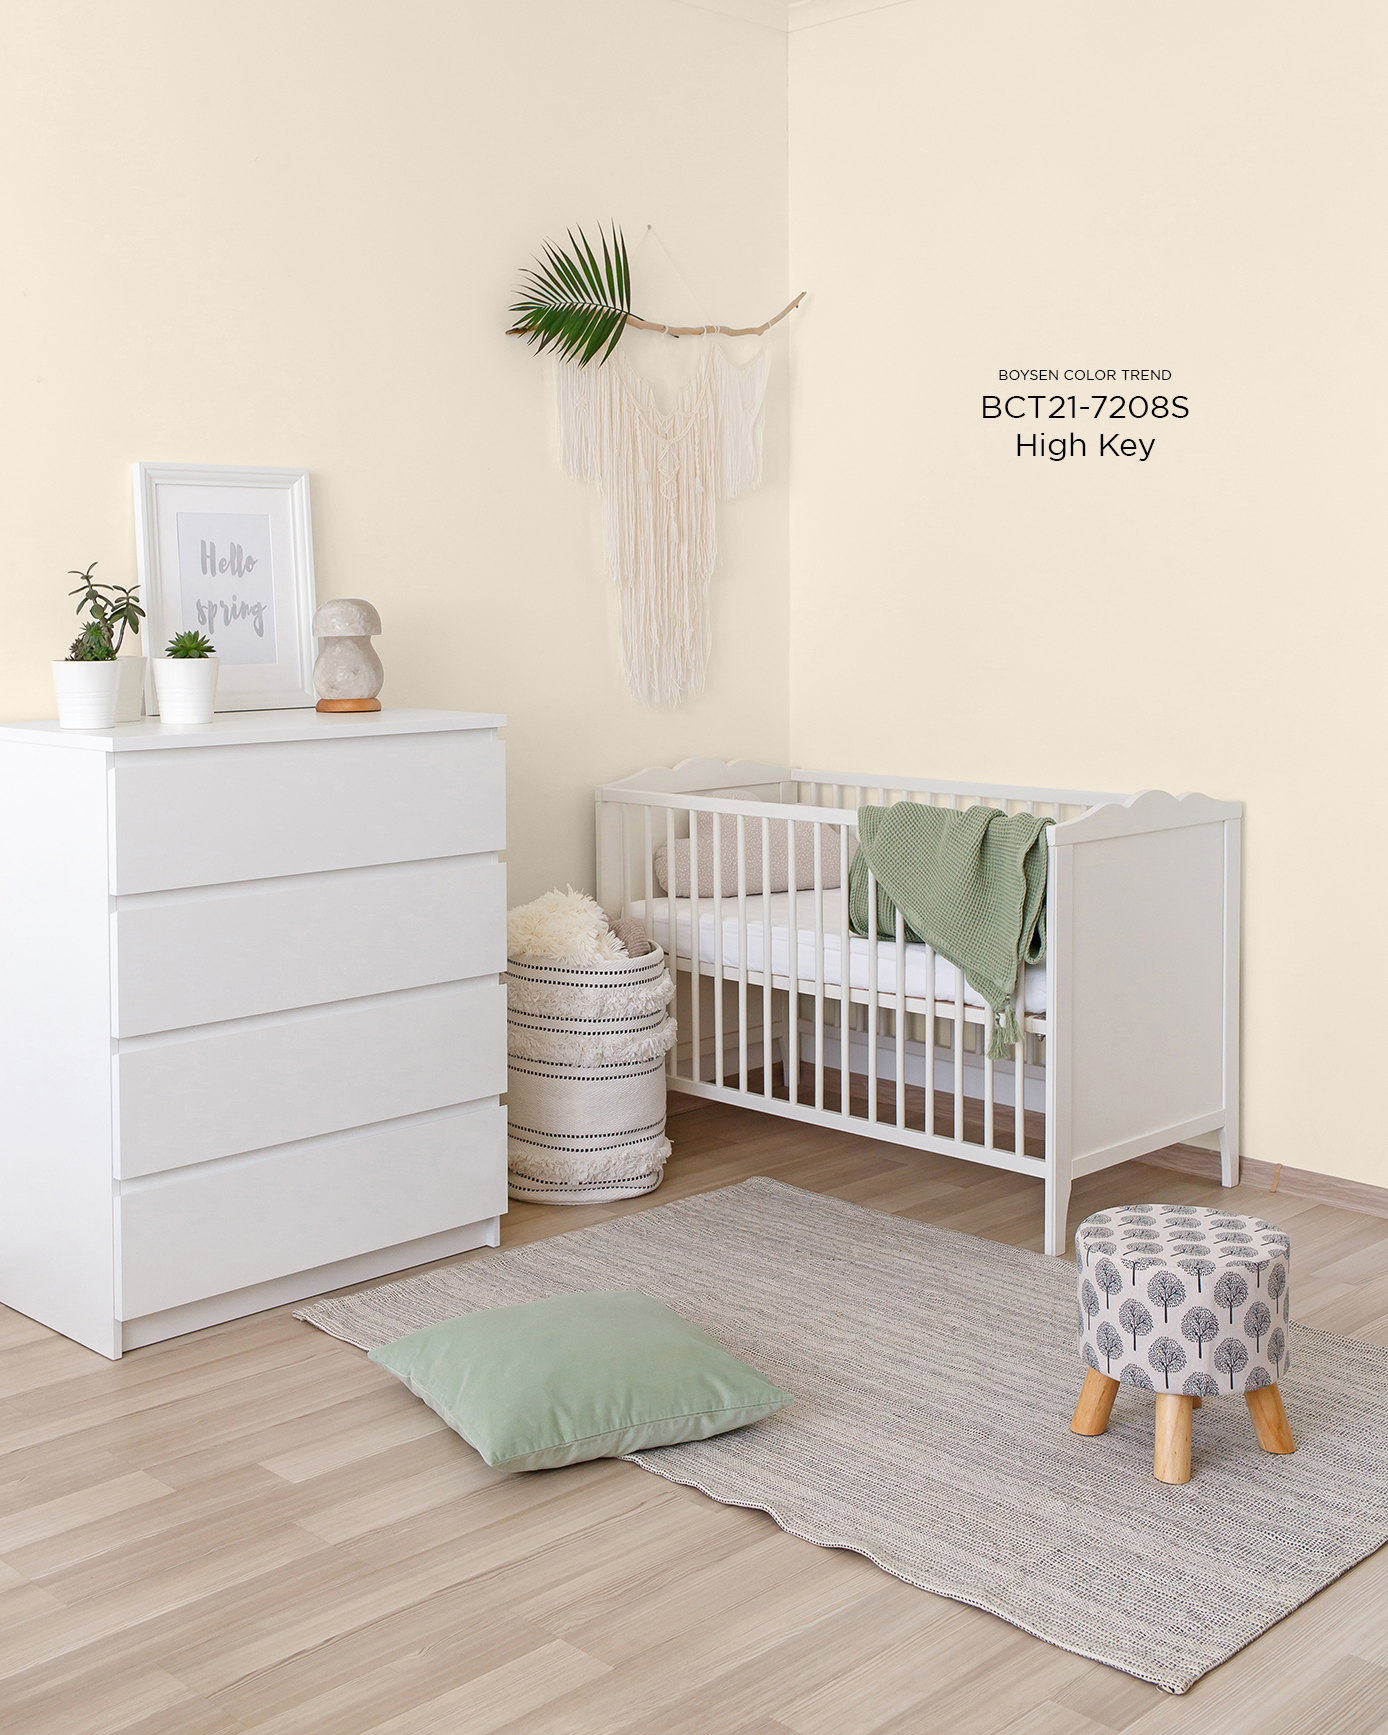 Kid’s Bedroom Wall Color Ideas with the Move Palette | MyBoysen